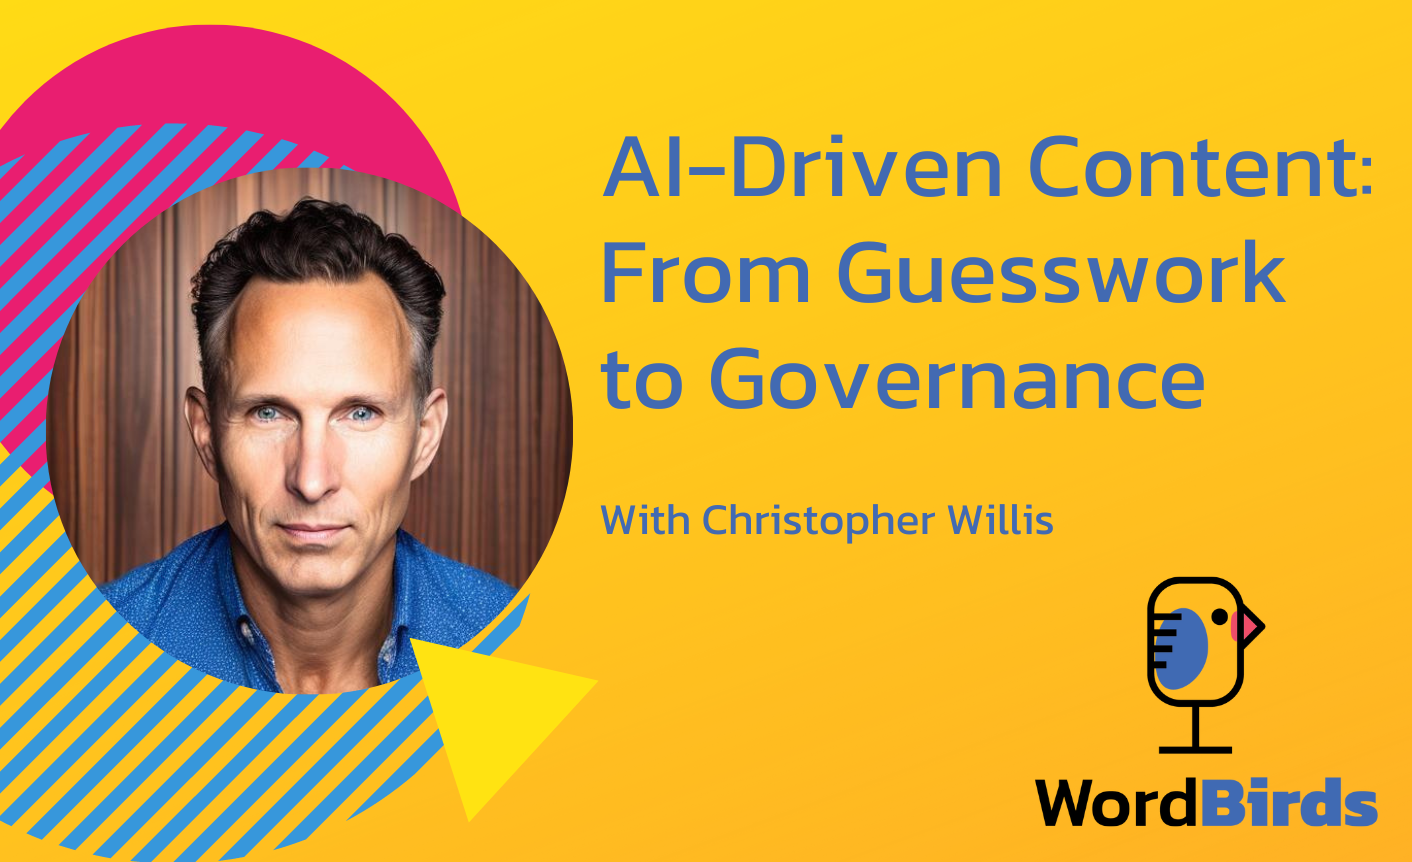 On a yellow background with a headshot of Christopher Willis on the left, the title reads "AI-Driven Content: From Guessword to Governance."